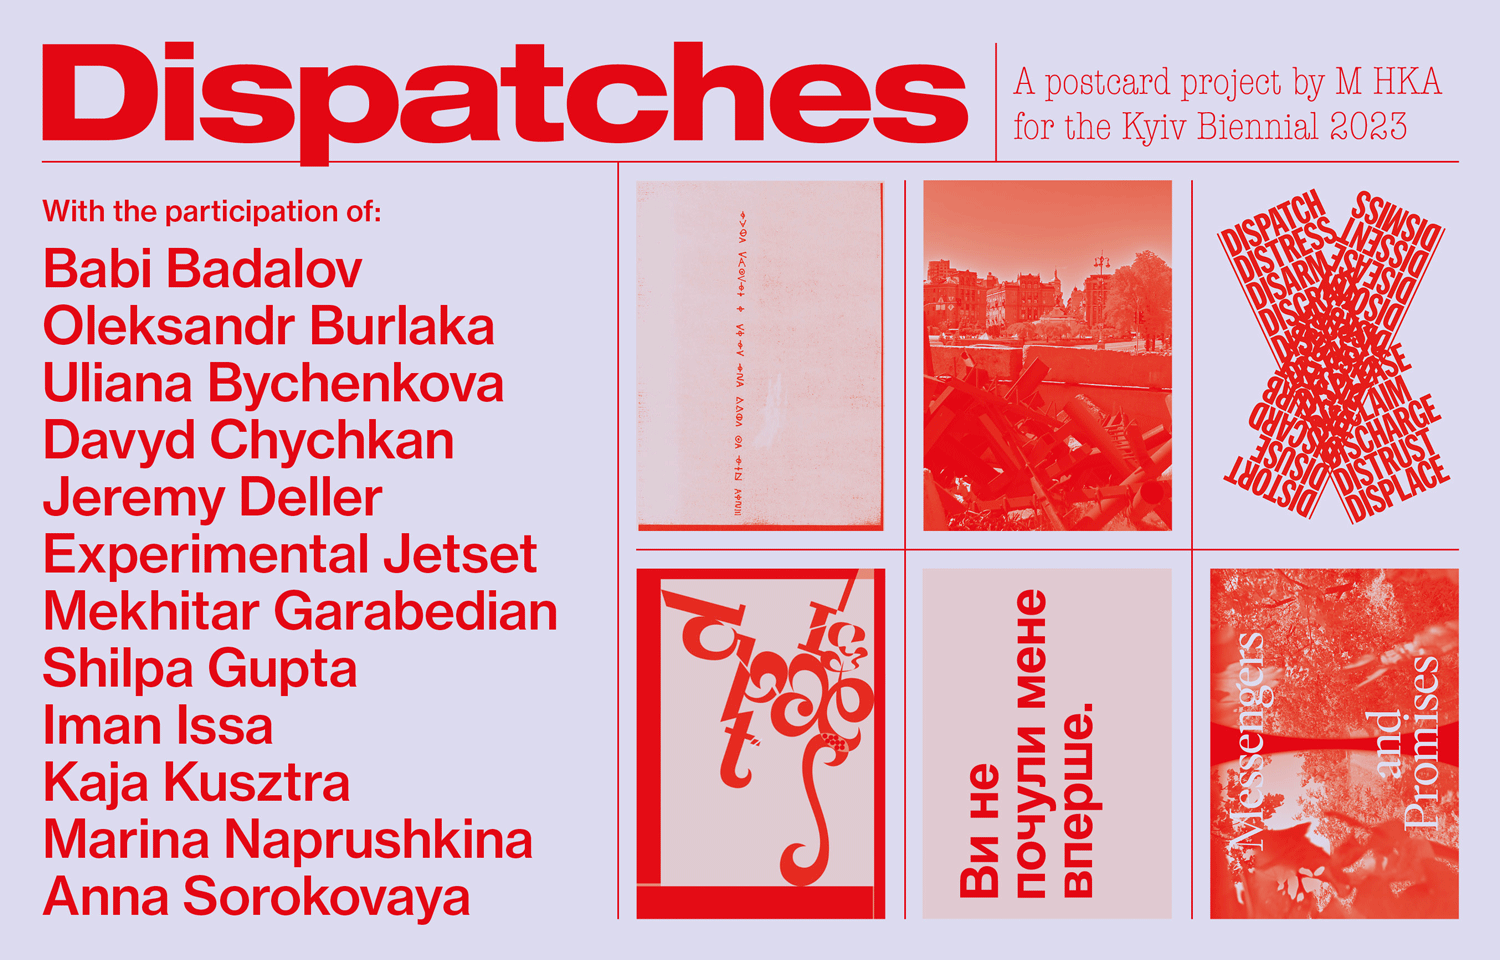 M HKA presents Dispatches: Artists Design Postcards as a Call for Solidarity